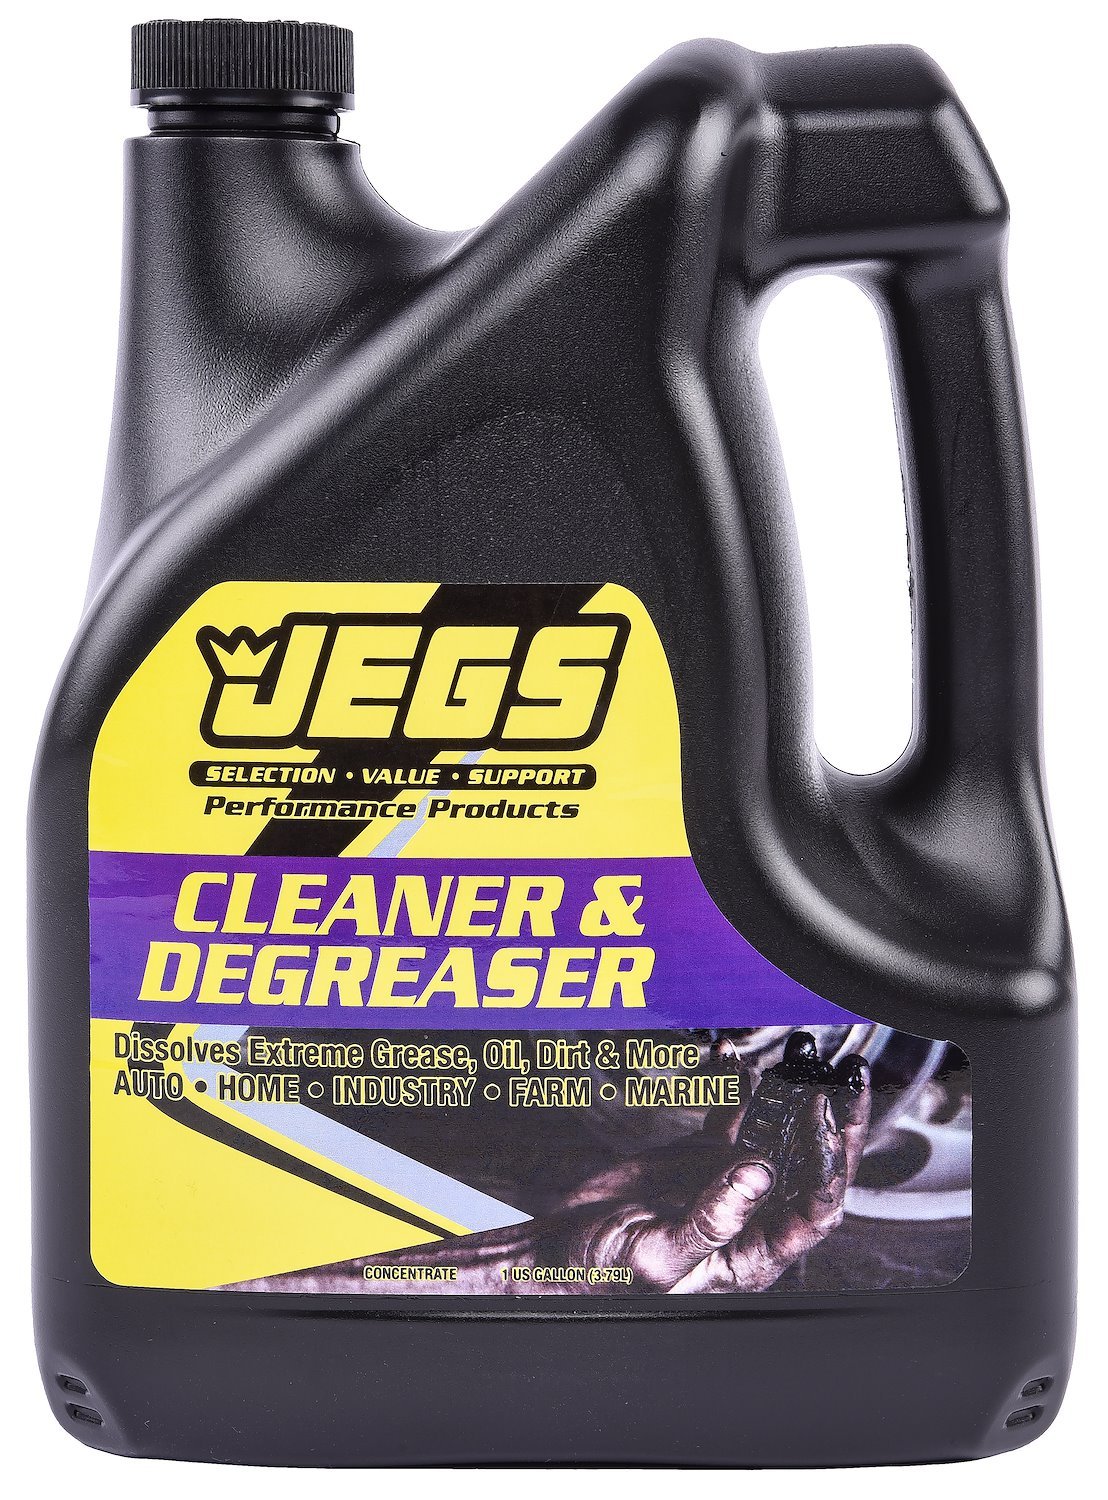 JEGS 72302: 1 Gallon of Industrial Strength Cleaner and Degreaser - JEGS